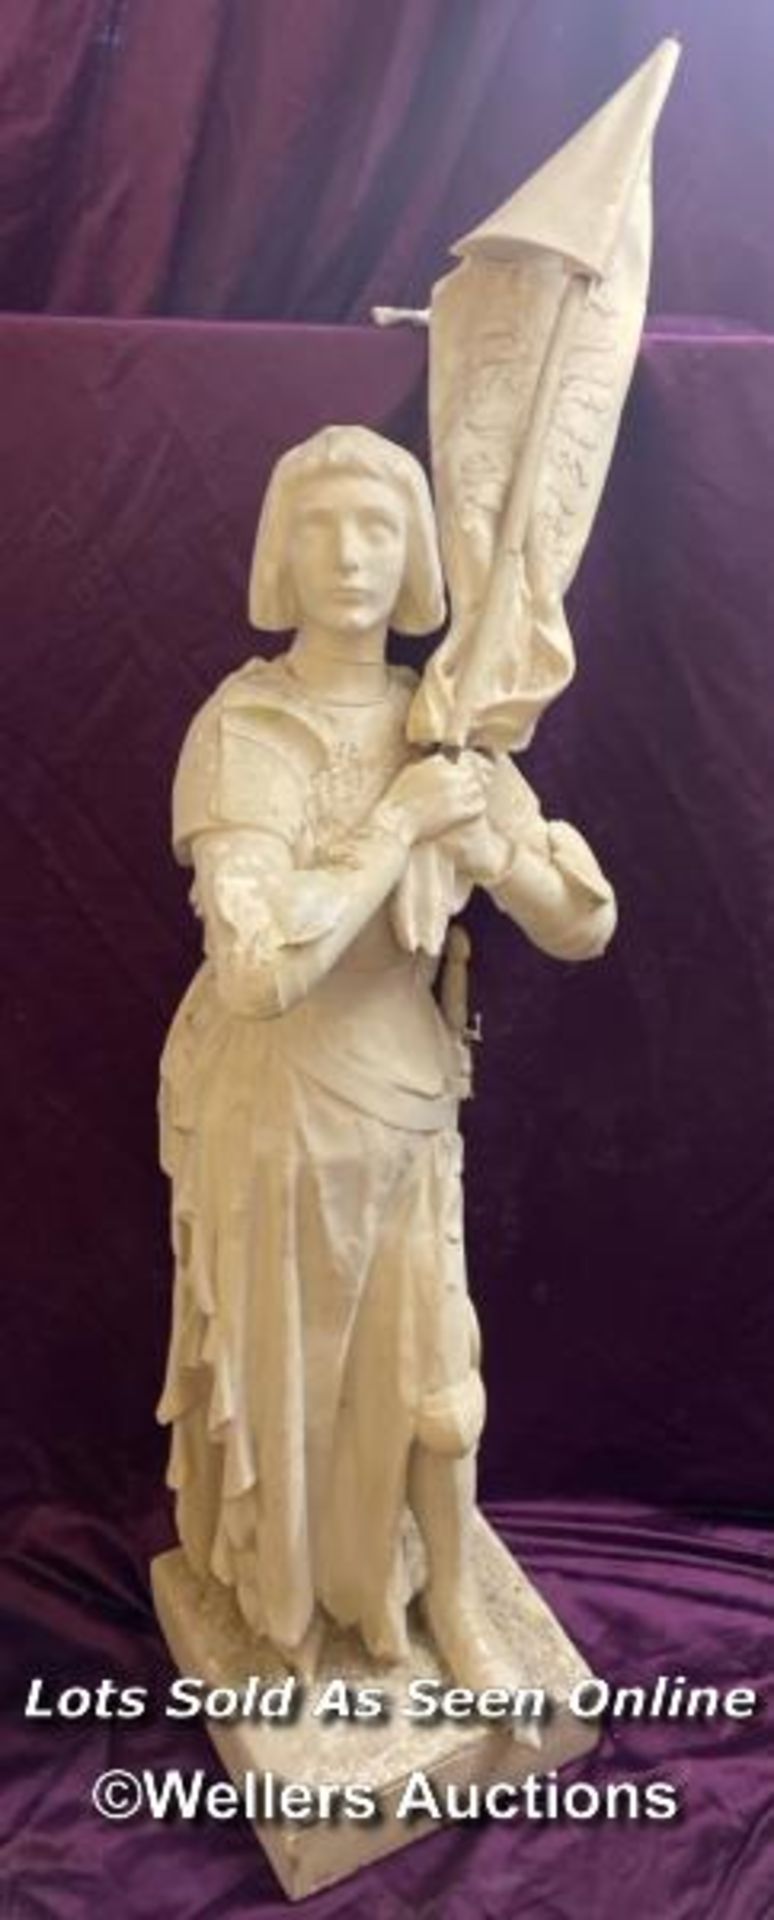 PLASTER CAST STATUE OF JOAN OF ARC, MAID OF ORLEANS, ALL MAJOR PARTS PRESENT AND SOME REPAIR